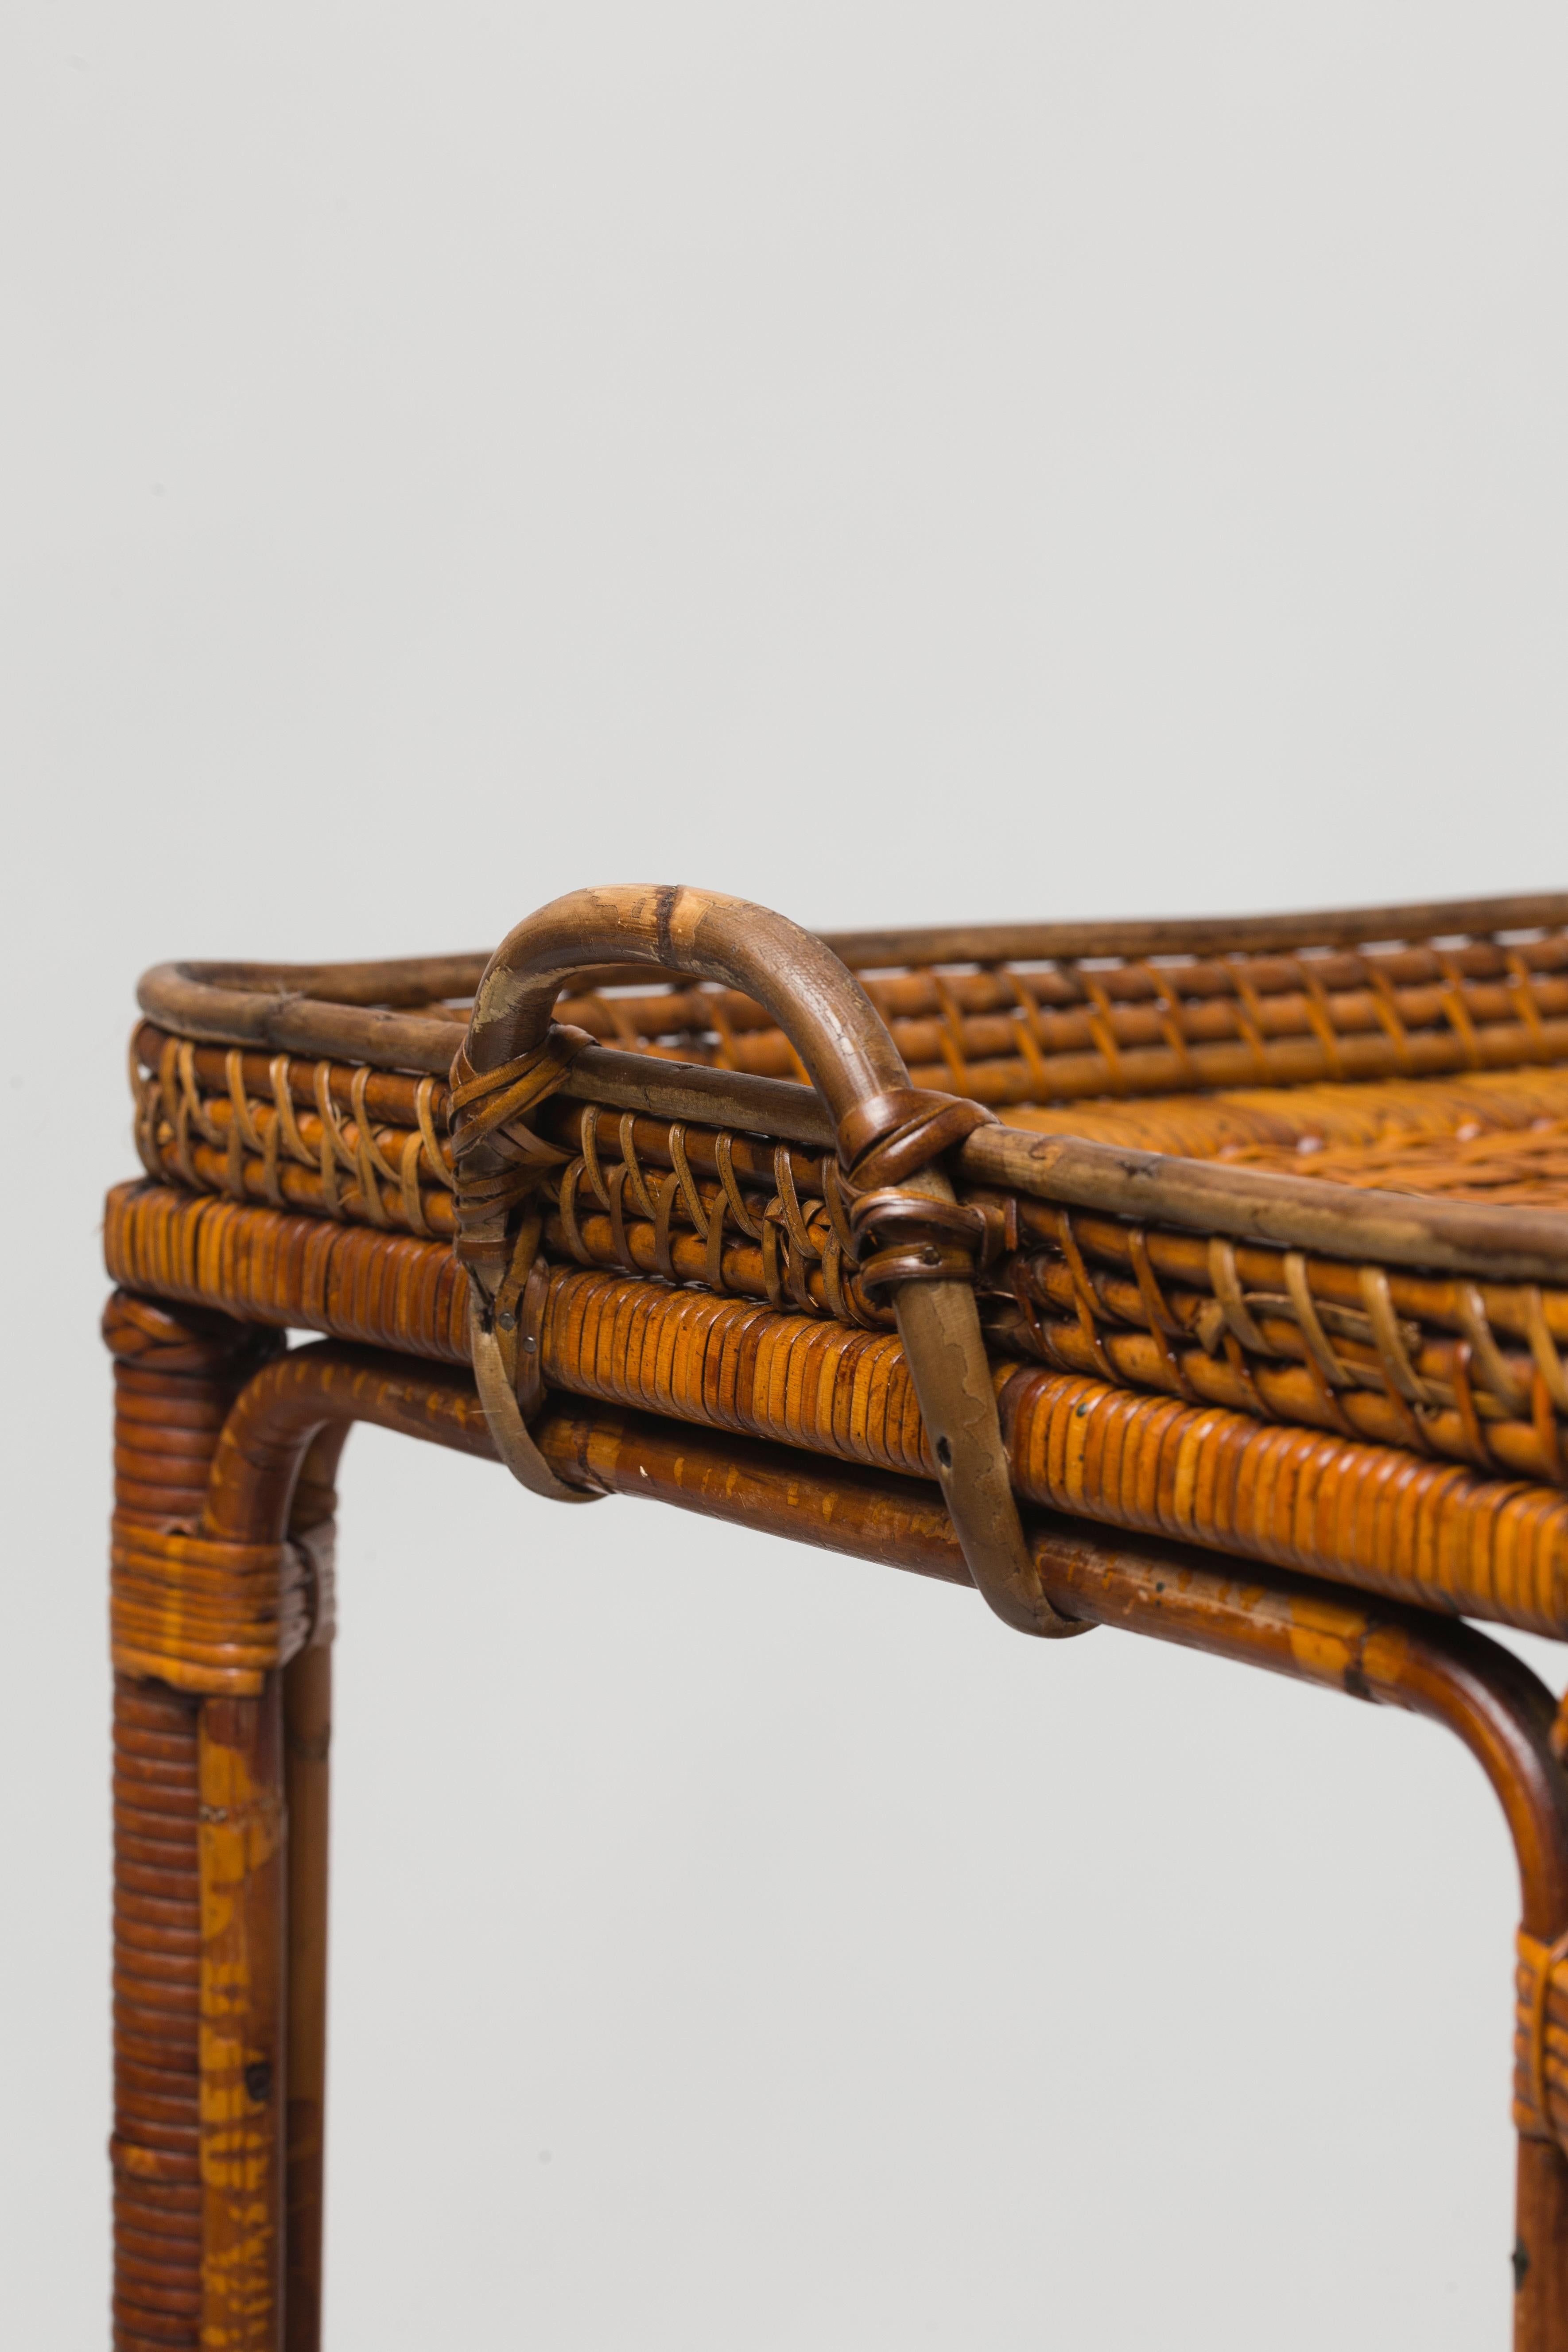 Serving table in natural woven rattan, France, 1900.
With two handles for carrying it and a lower shelf.
In excellent original condition.